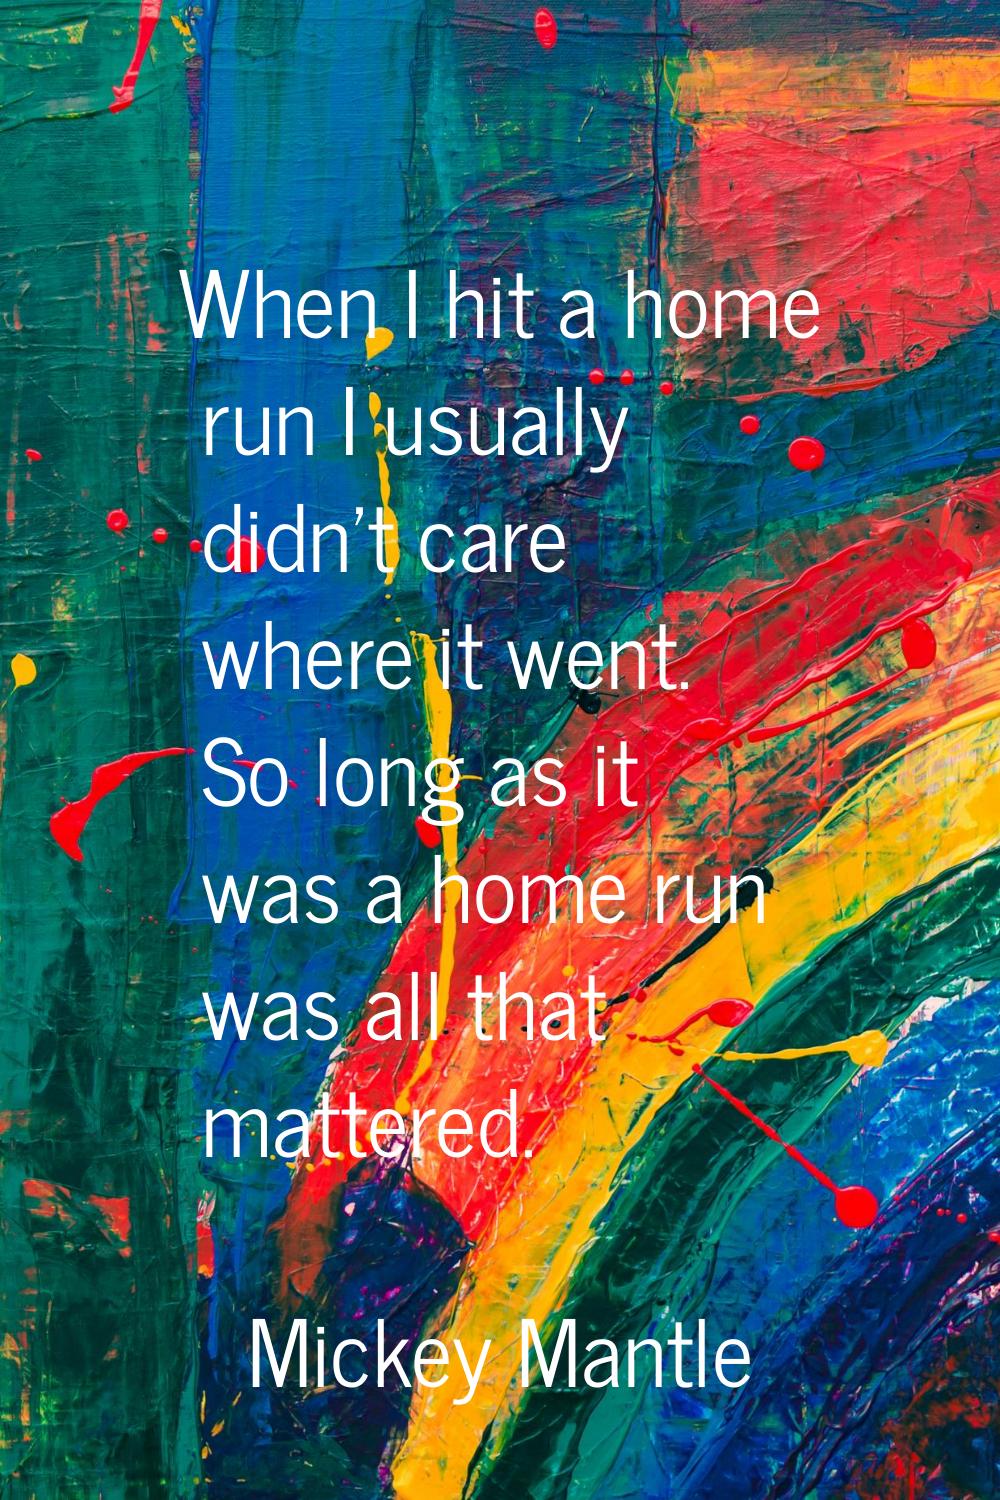 When I hit a home run I usually didn't care where it went. So long as it was a home run was all tha